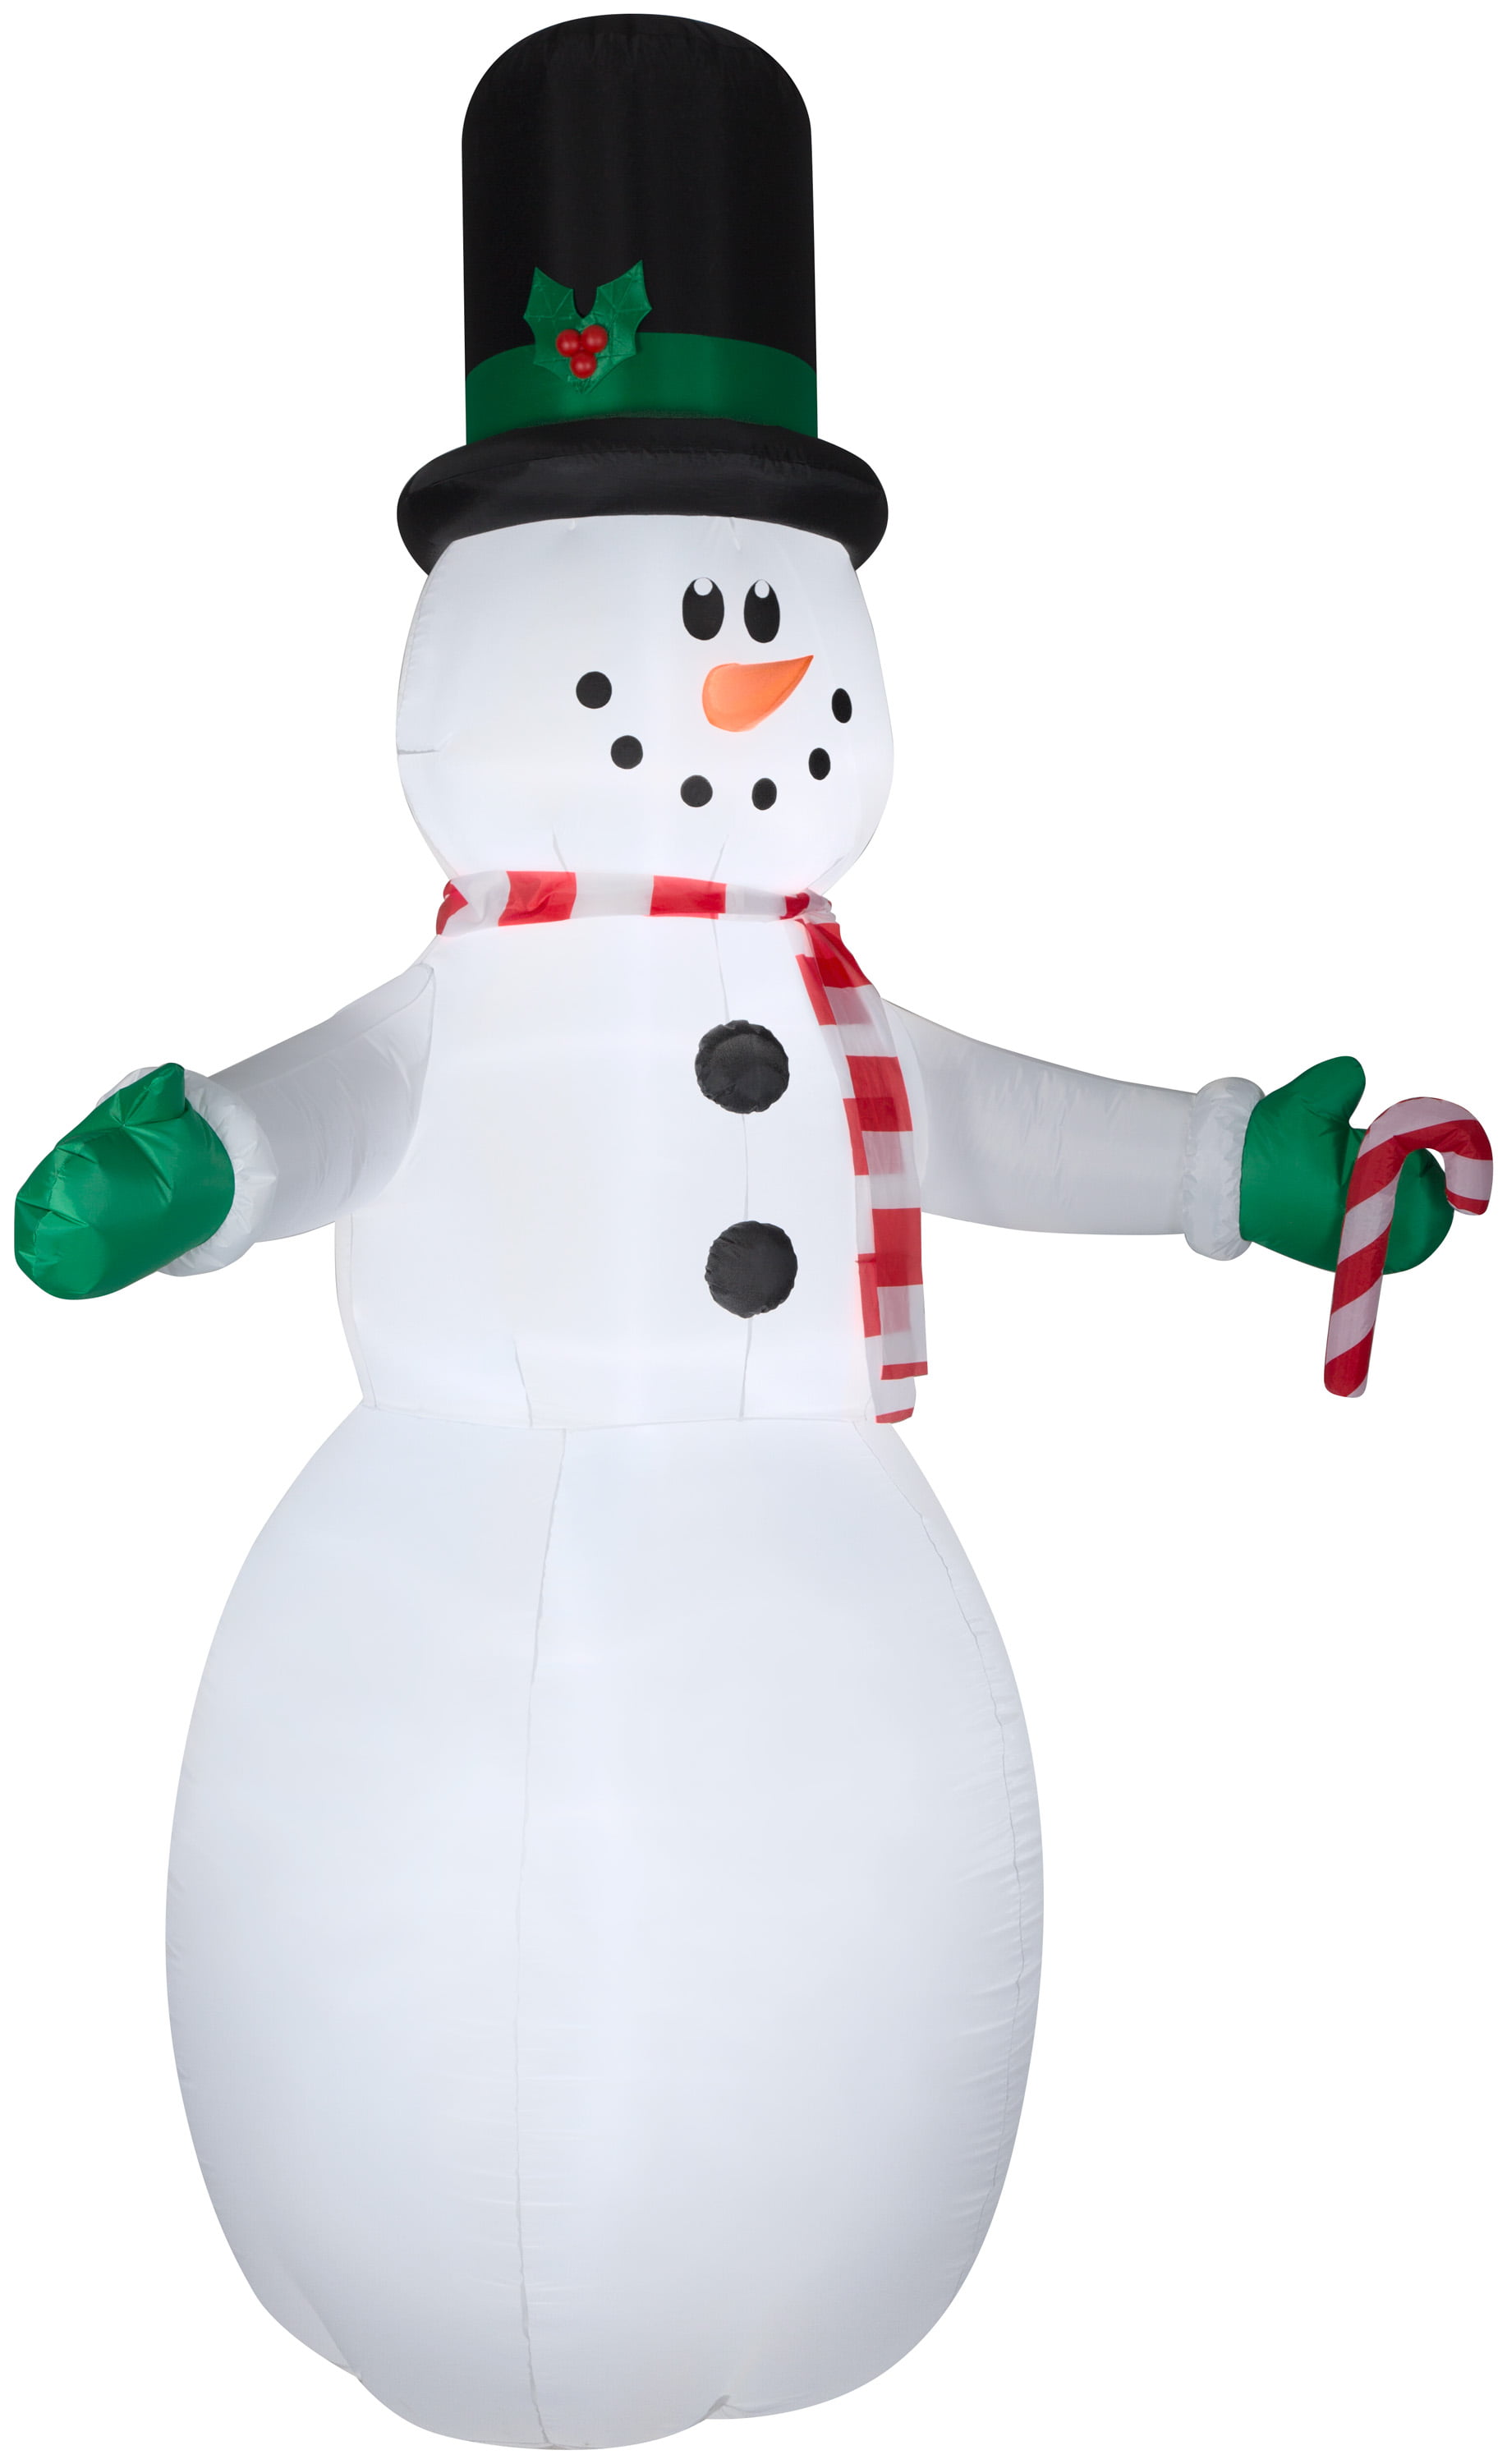 Airblown Inflatable-Snowman Giant 10ft tall by Gemmy Industries Christmas Decor 